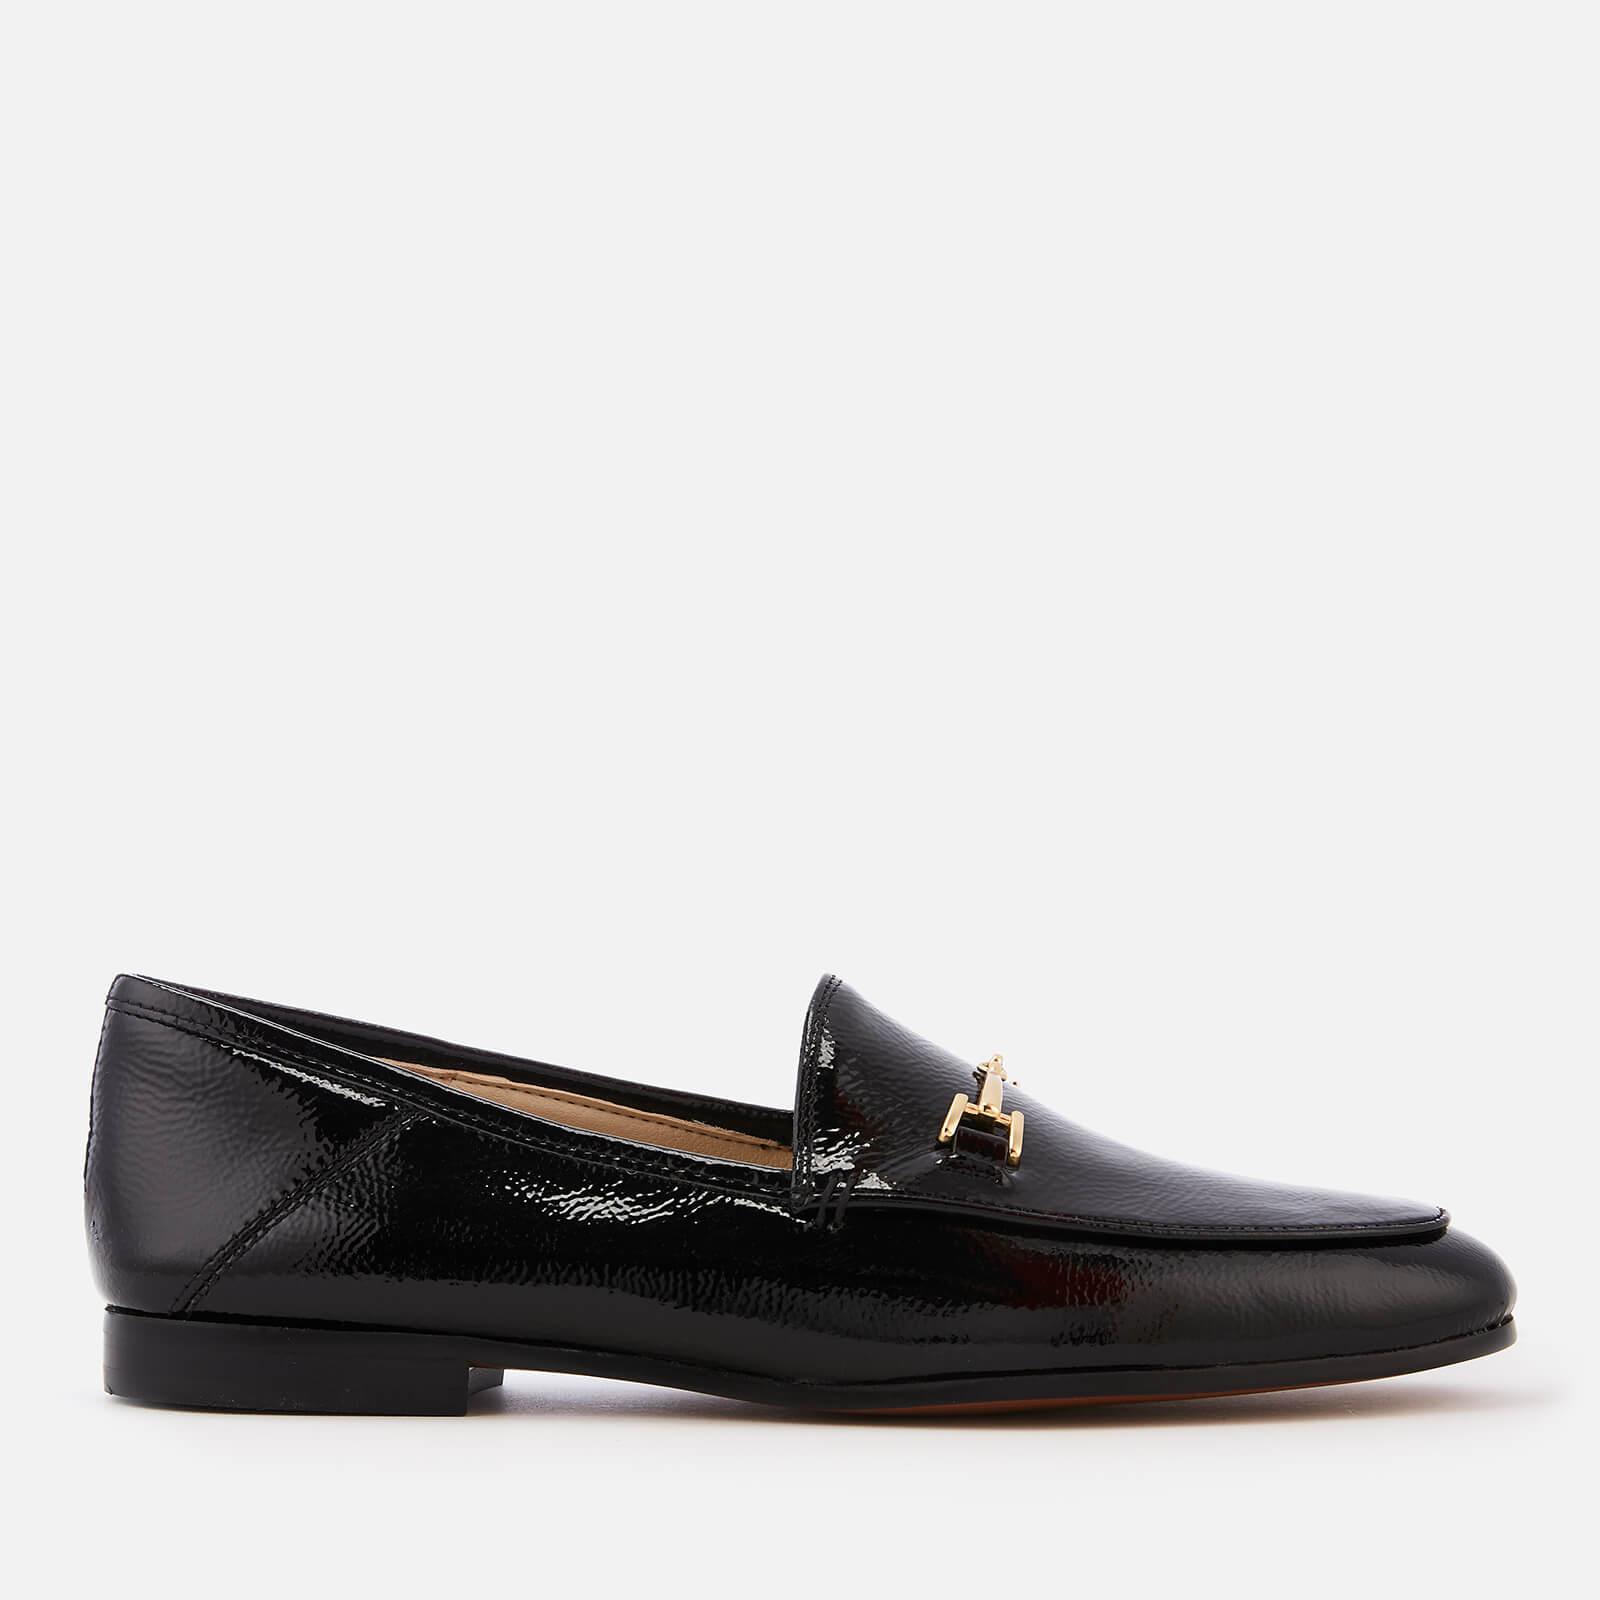 Sam Edelman Leather Loraine Crinkle Patent Loafers in Black - Lyst